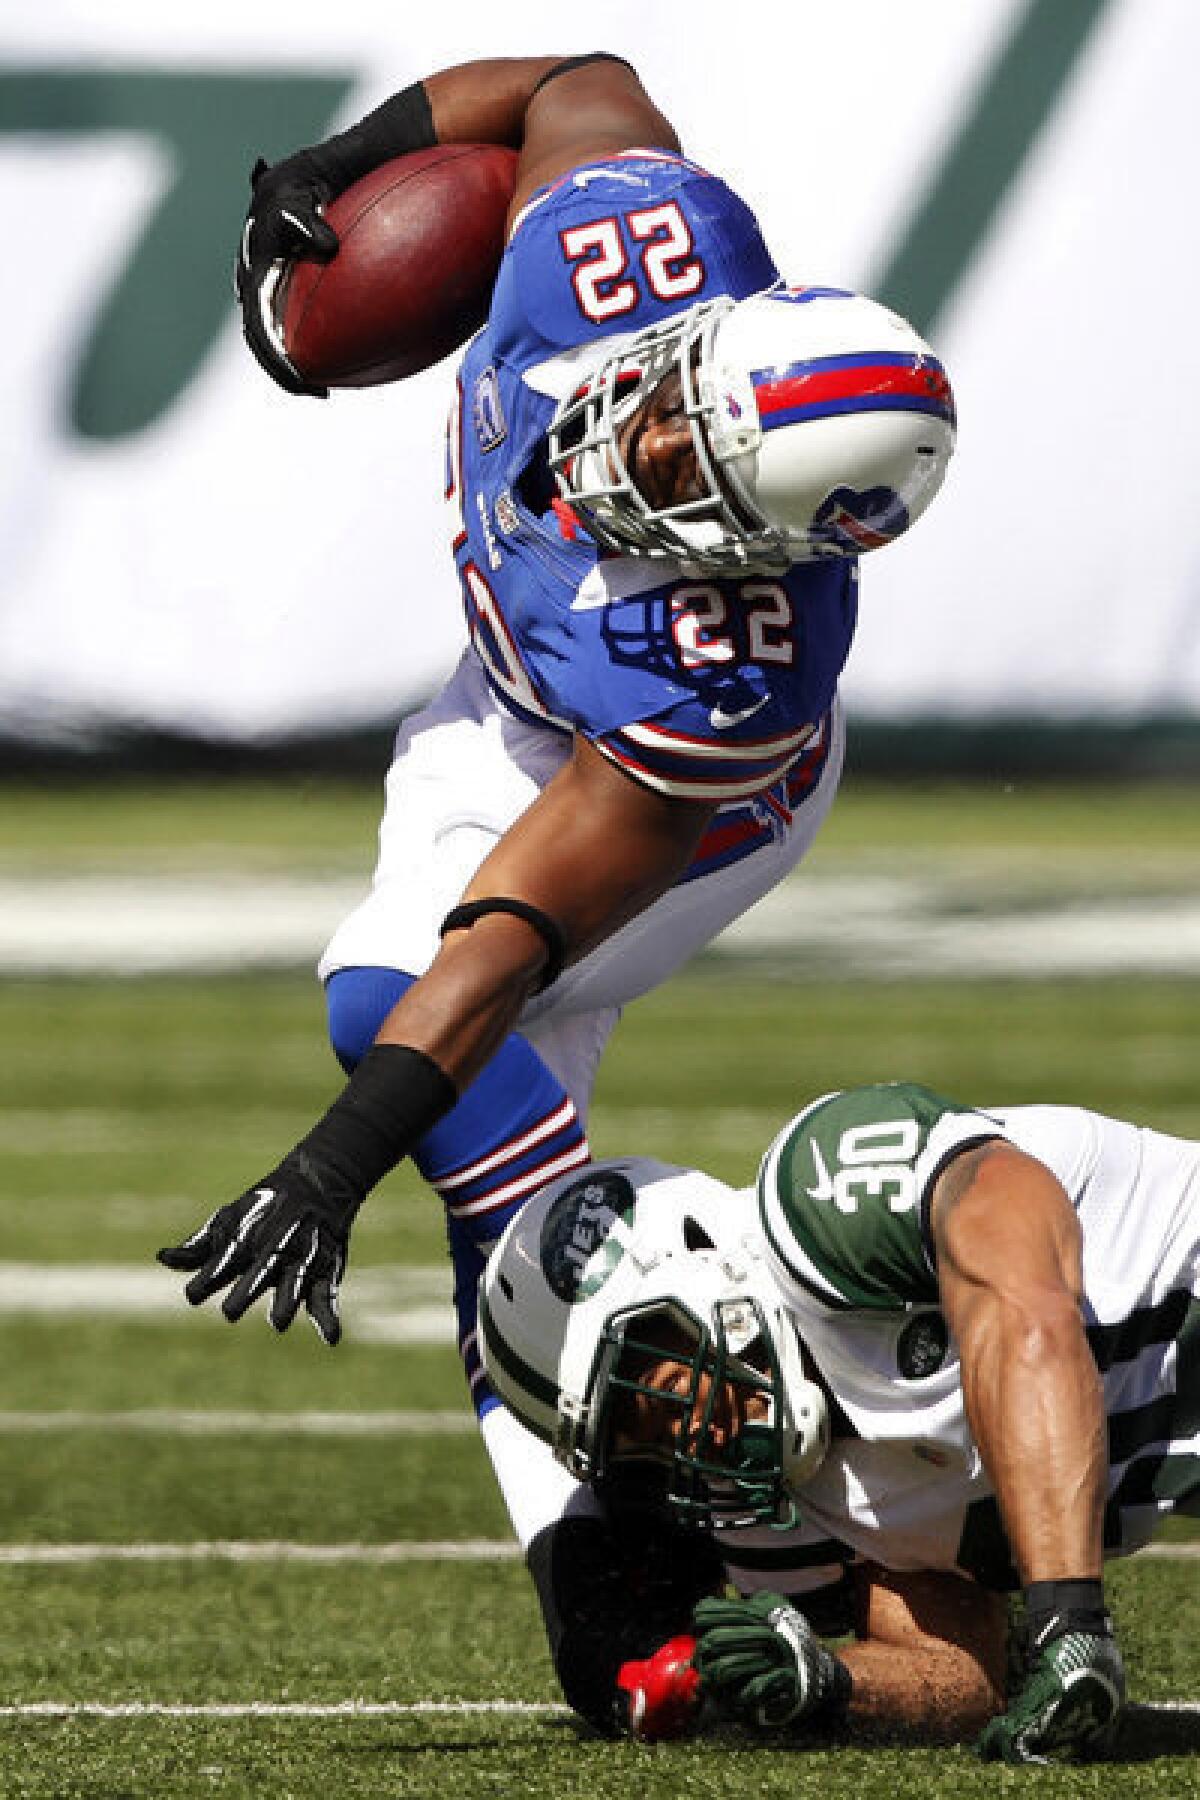 Buffalo Bills running back Fred Jackson is hit by New York Jets defensive back LaRon Landry during the first half. Jackson was injured on the play.